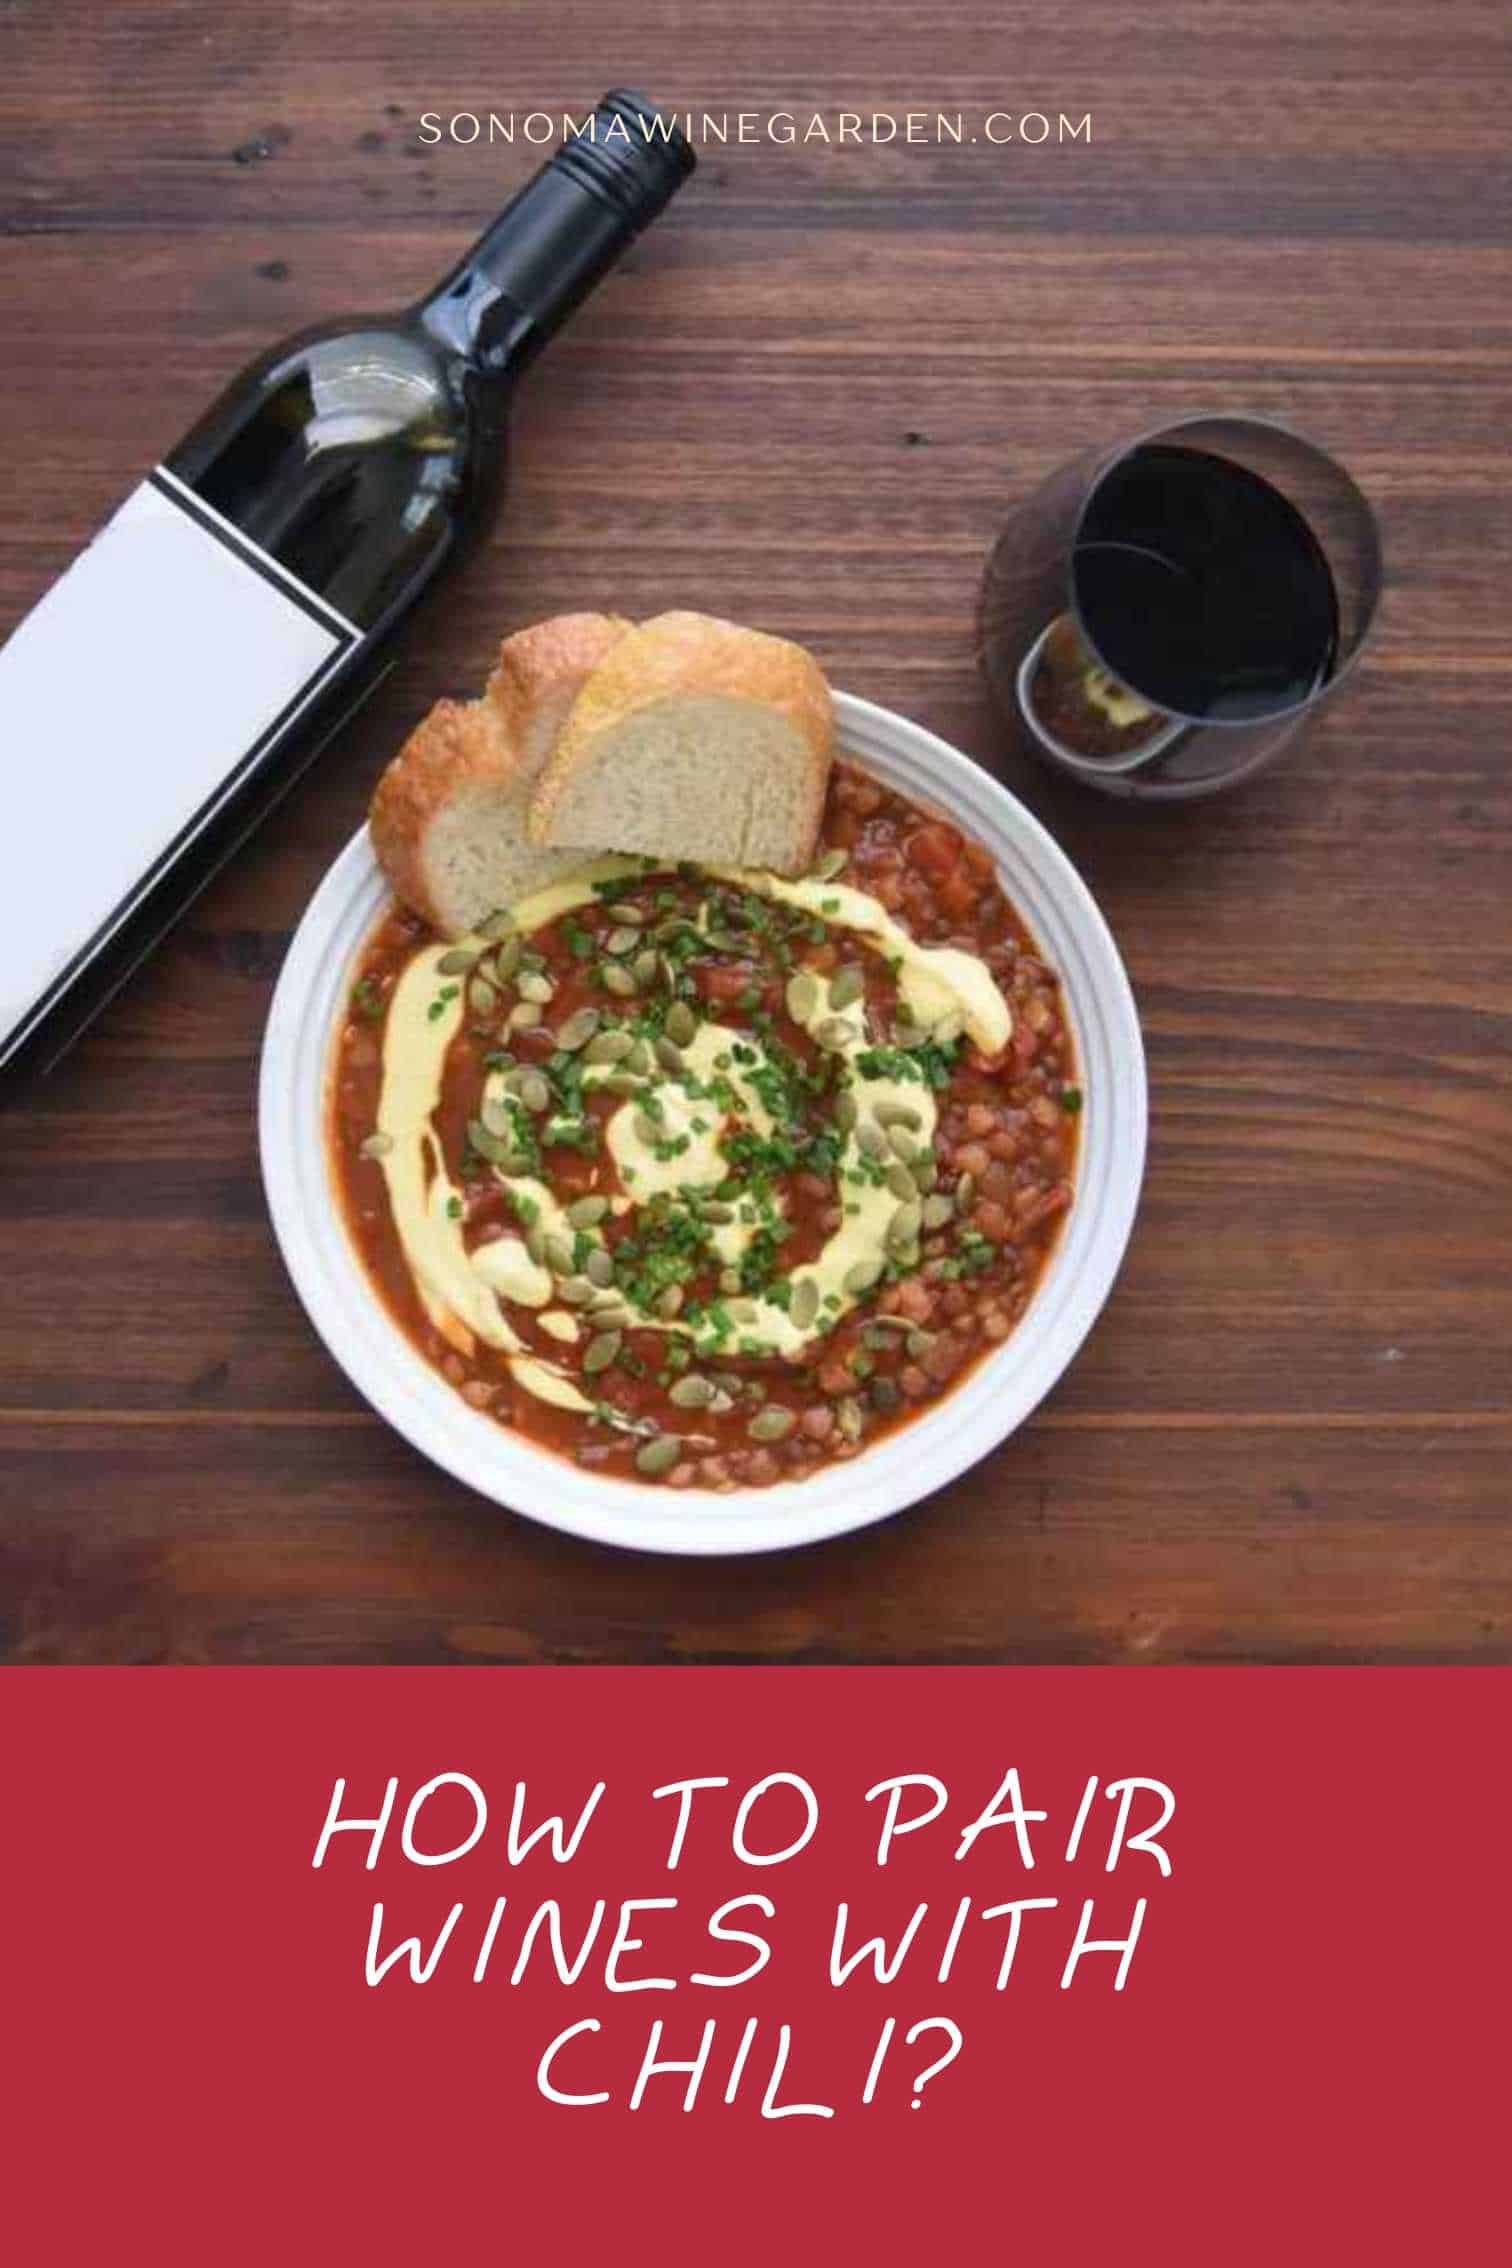 How To Pair Wines With Chili (Tips & Best Picks)